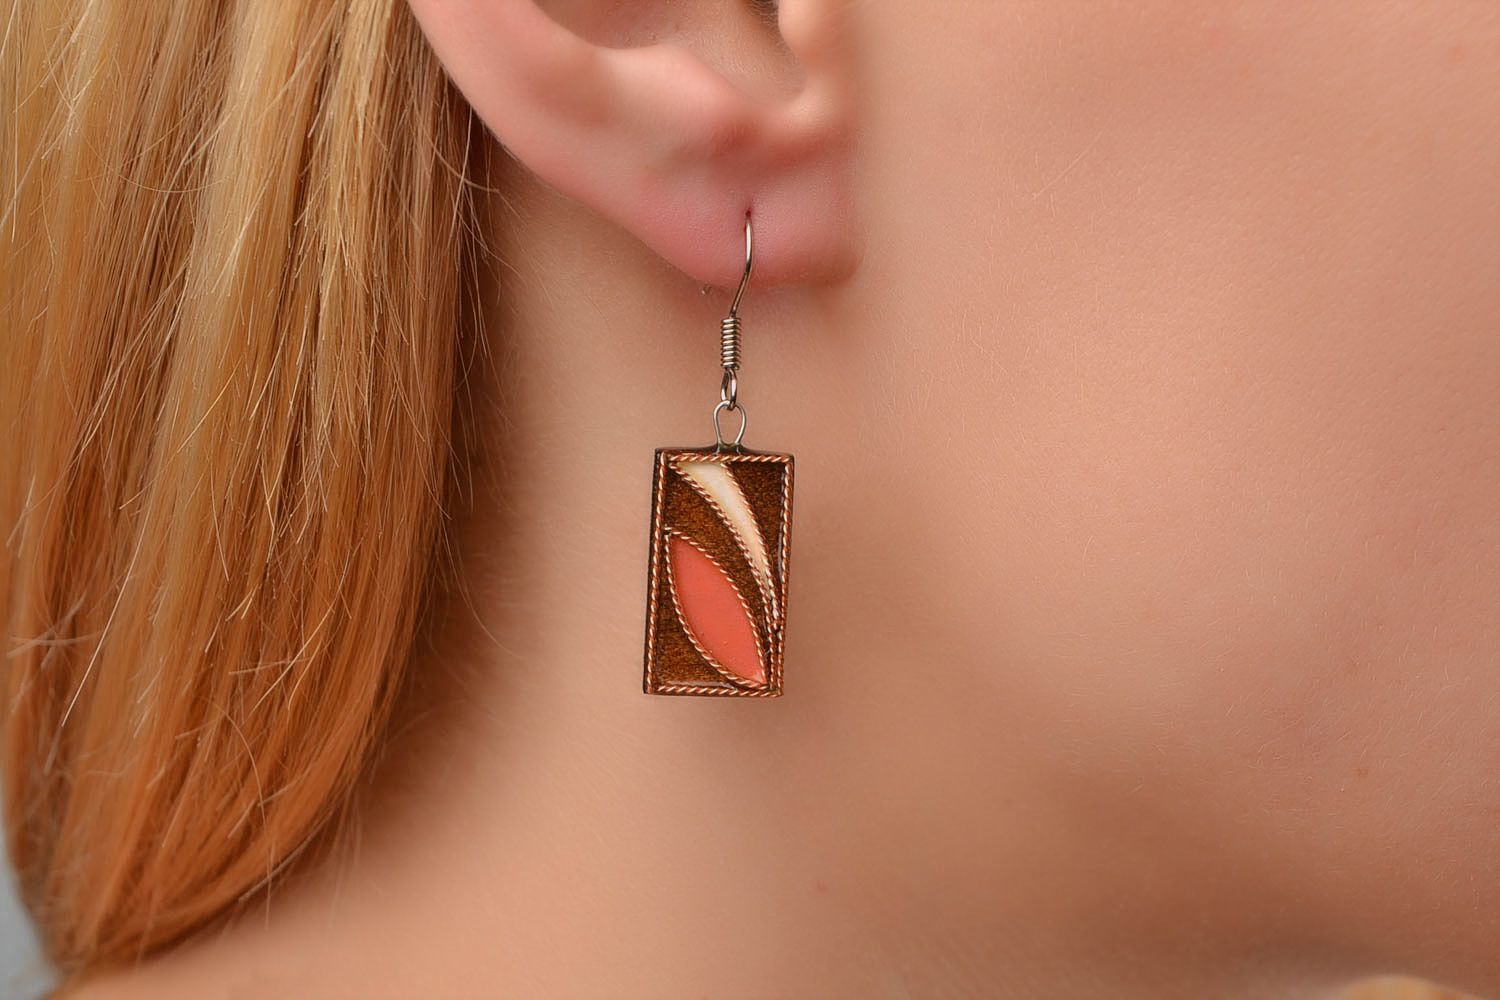 Handmade wooden earrings fashion accessories beautiful jewellery gifts for her photo 1